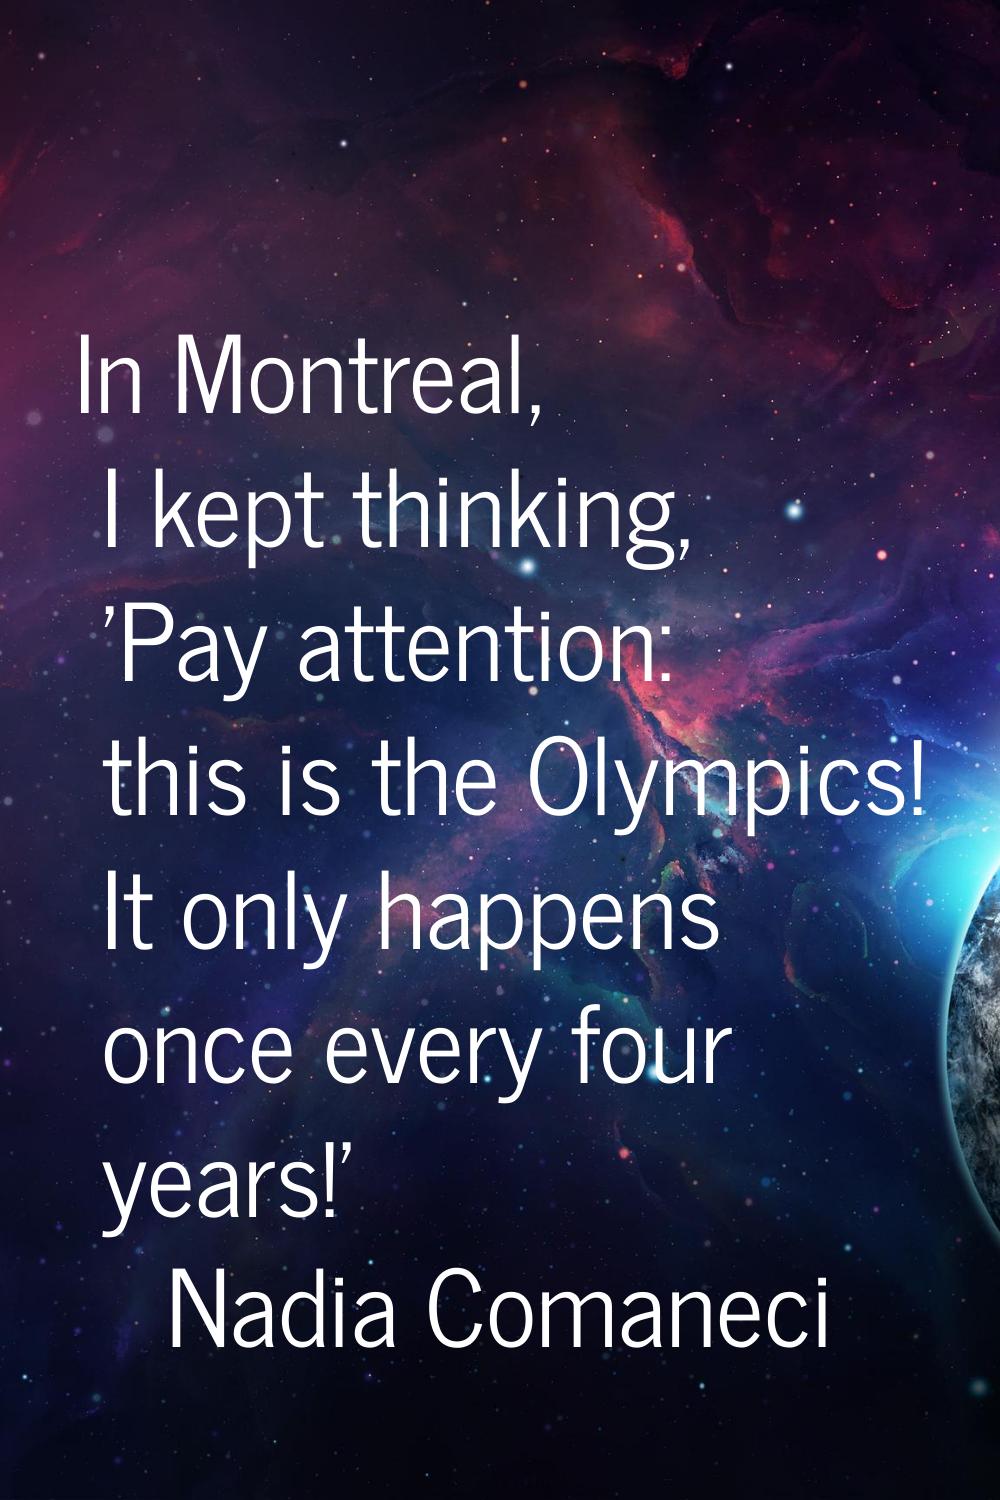 In Montreal, I kept thinking, 'Pay attention: this is the Olympics! It only happens once every four